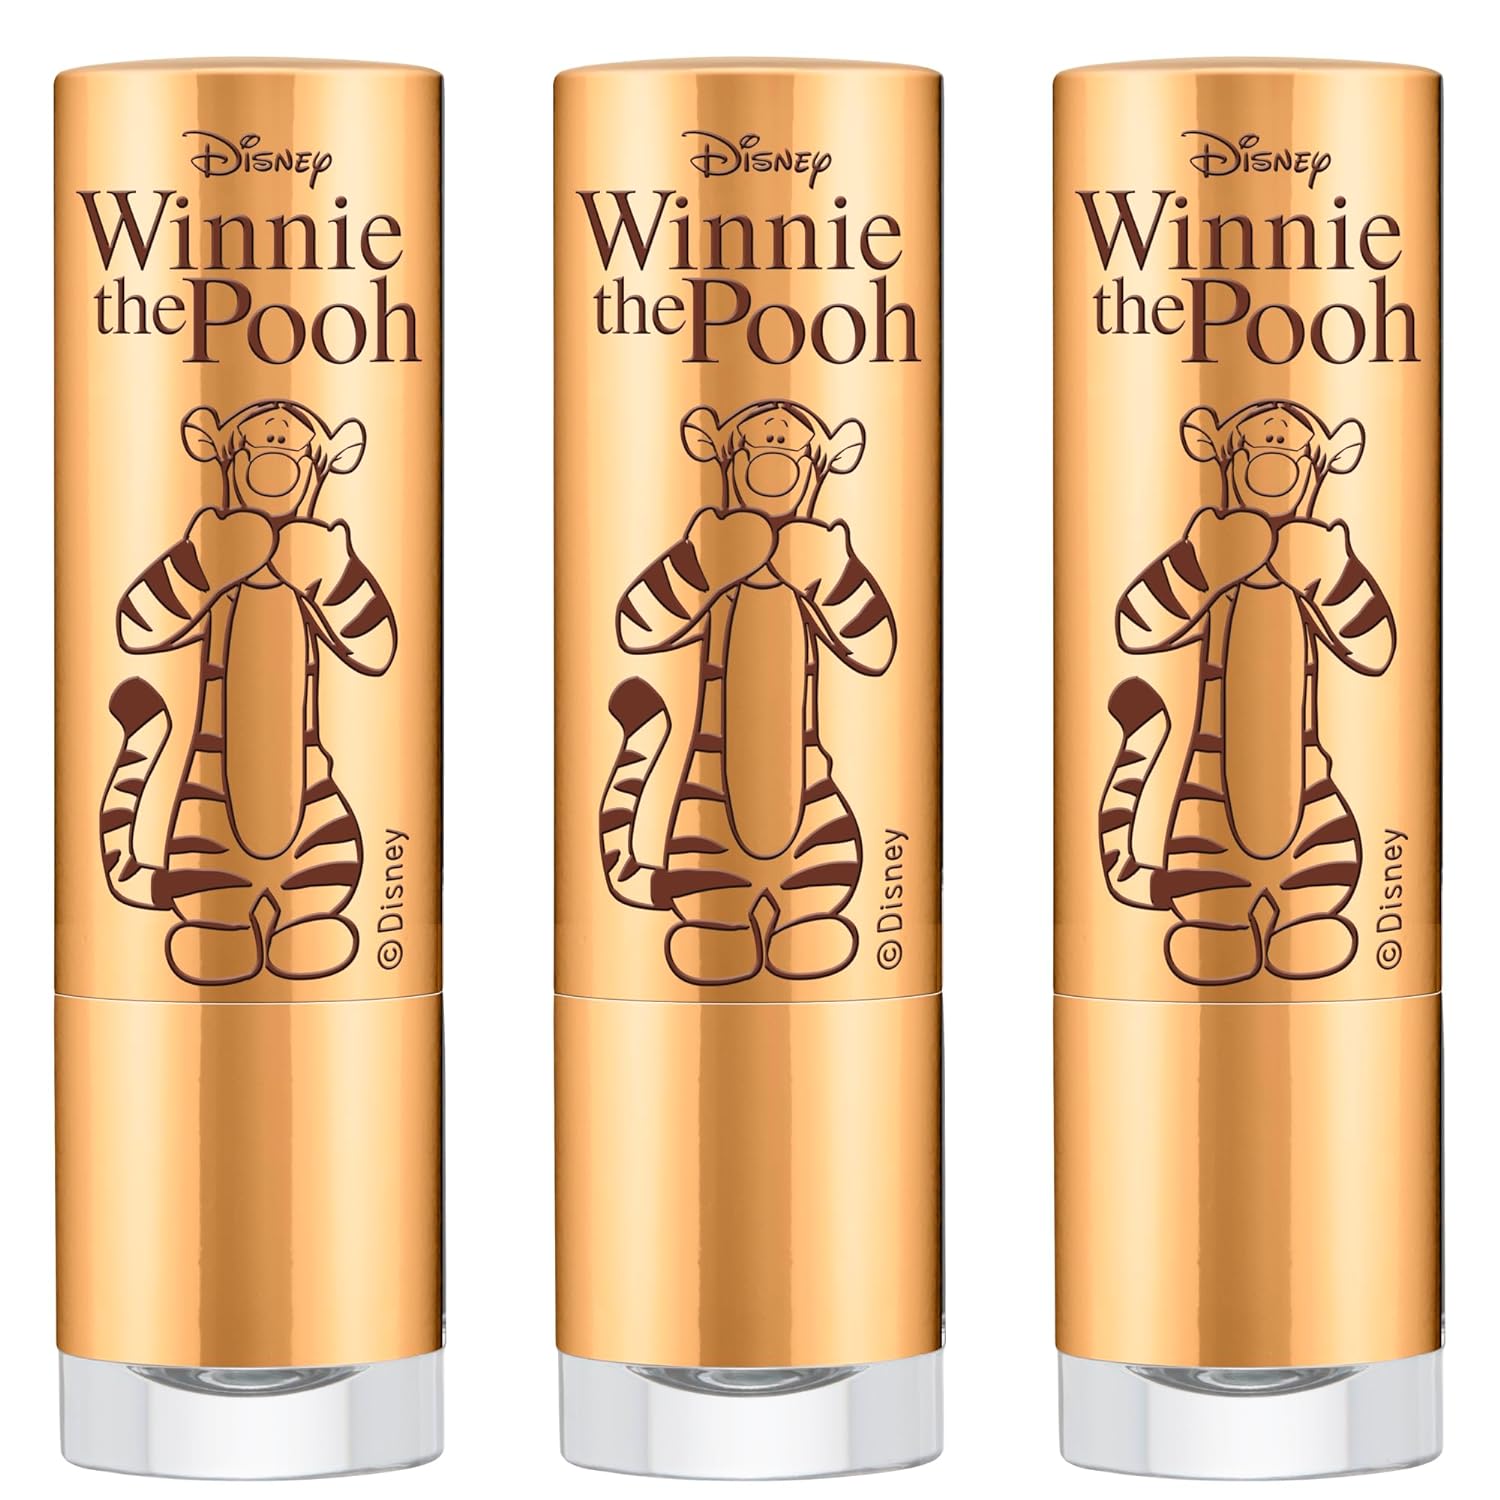 Catrice Disney Winnie the Pooh Lip Balm, No. 030, Brown, Vegan, Paraben-Free, No Microplastic Particles, Nanoparticles Free, Pack of 3 (3 x 3.2 g)